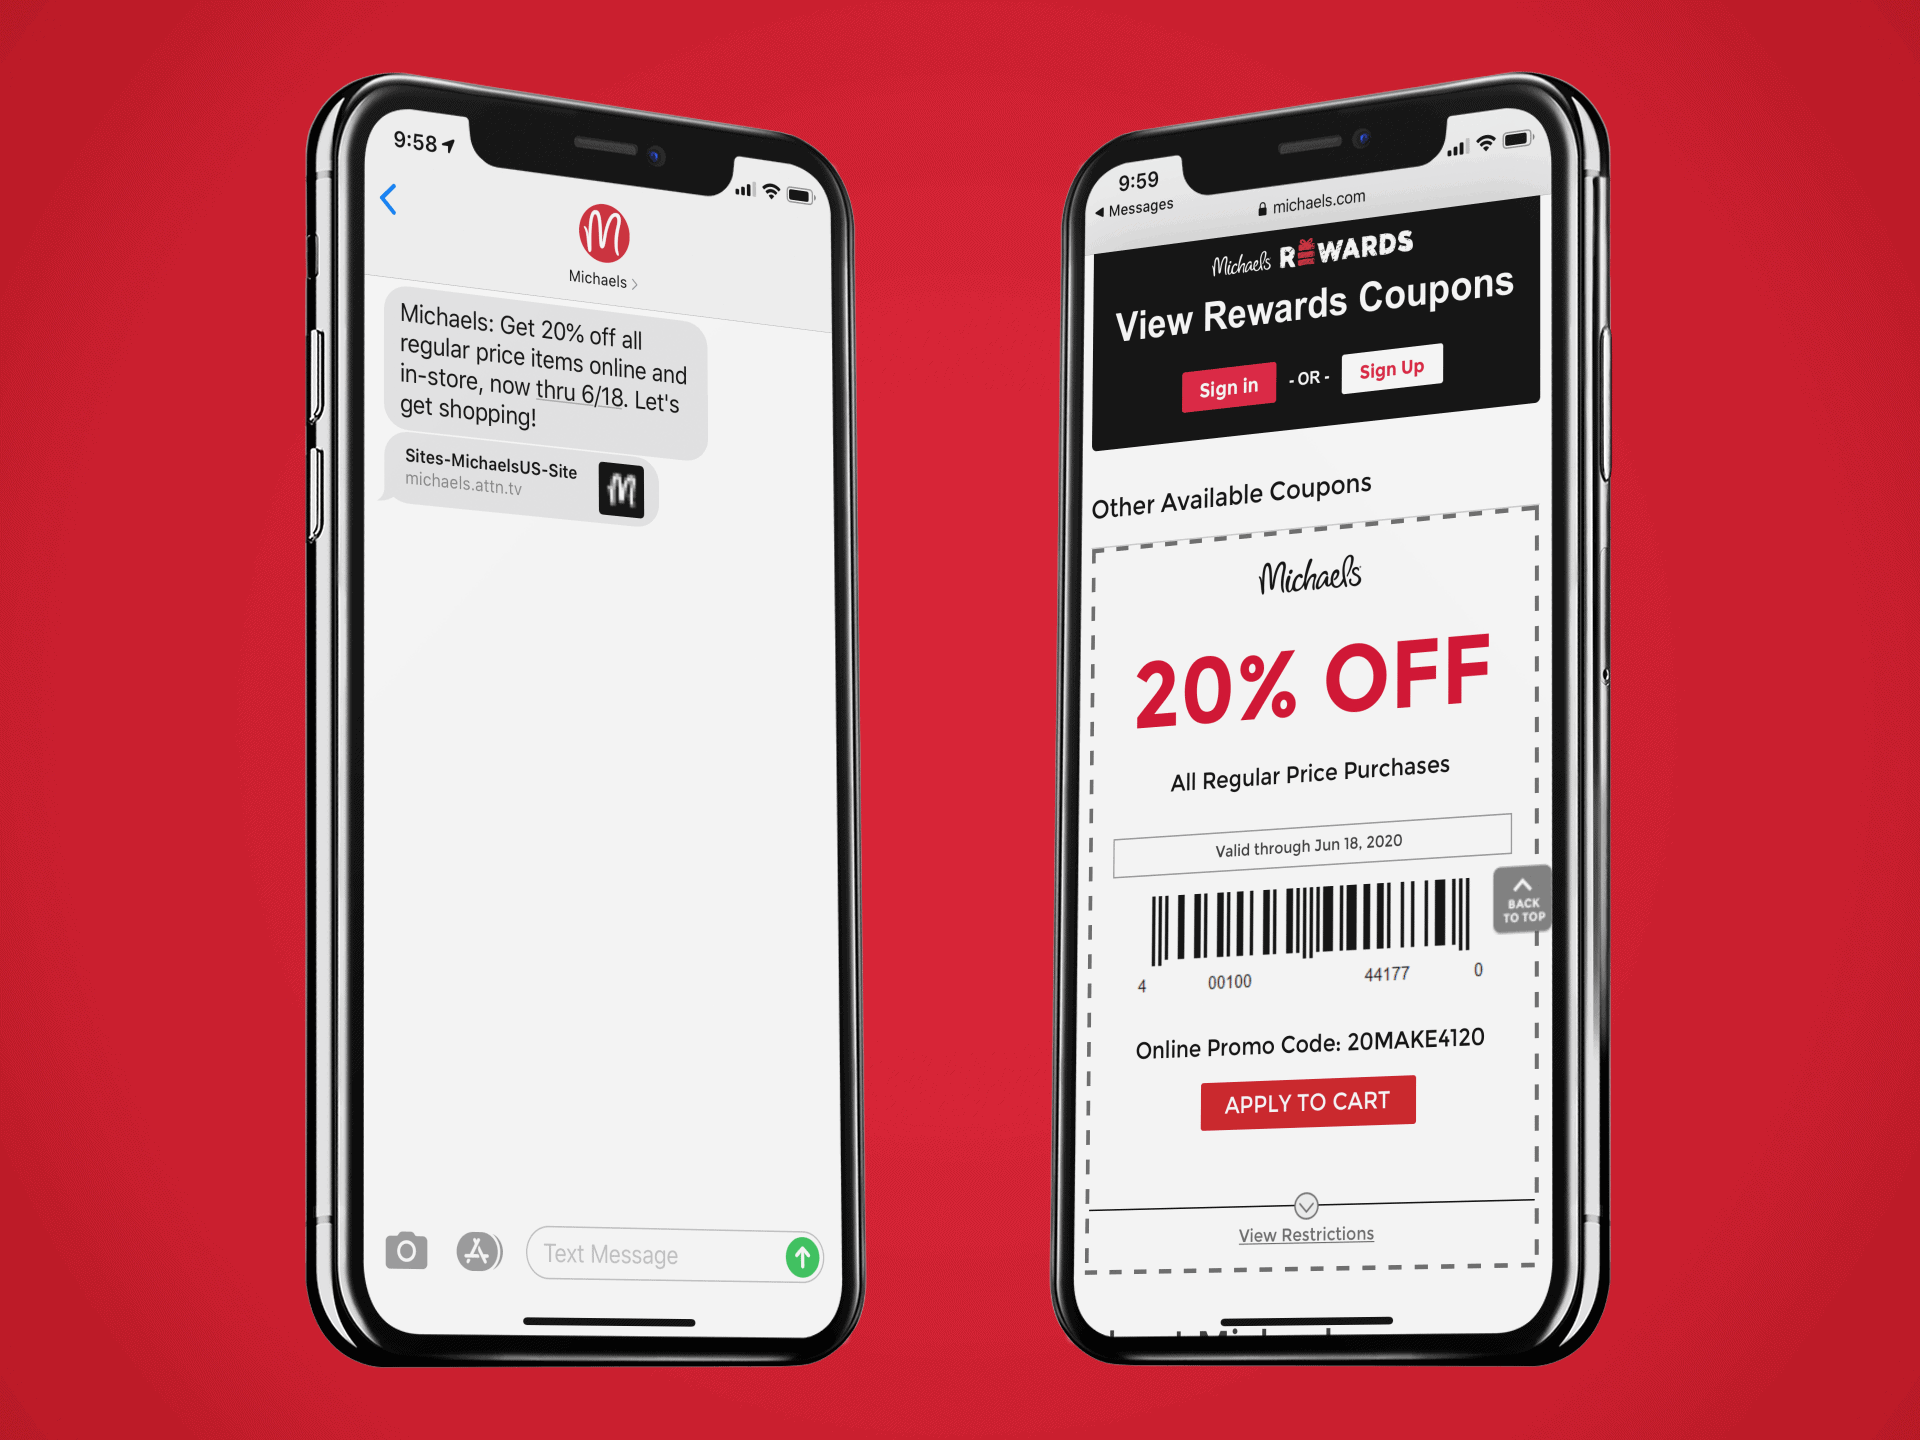 Michael's Mobile Coupon Example